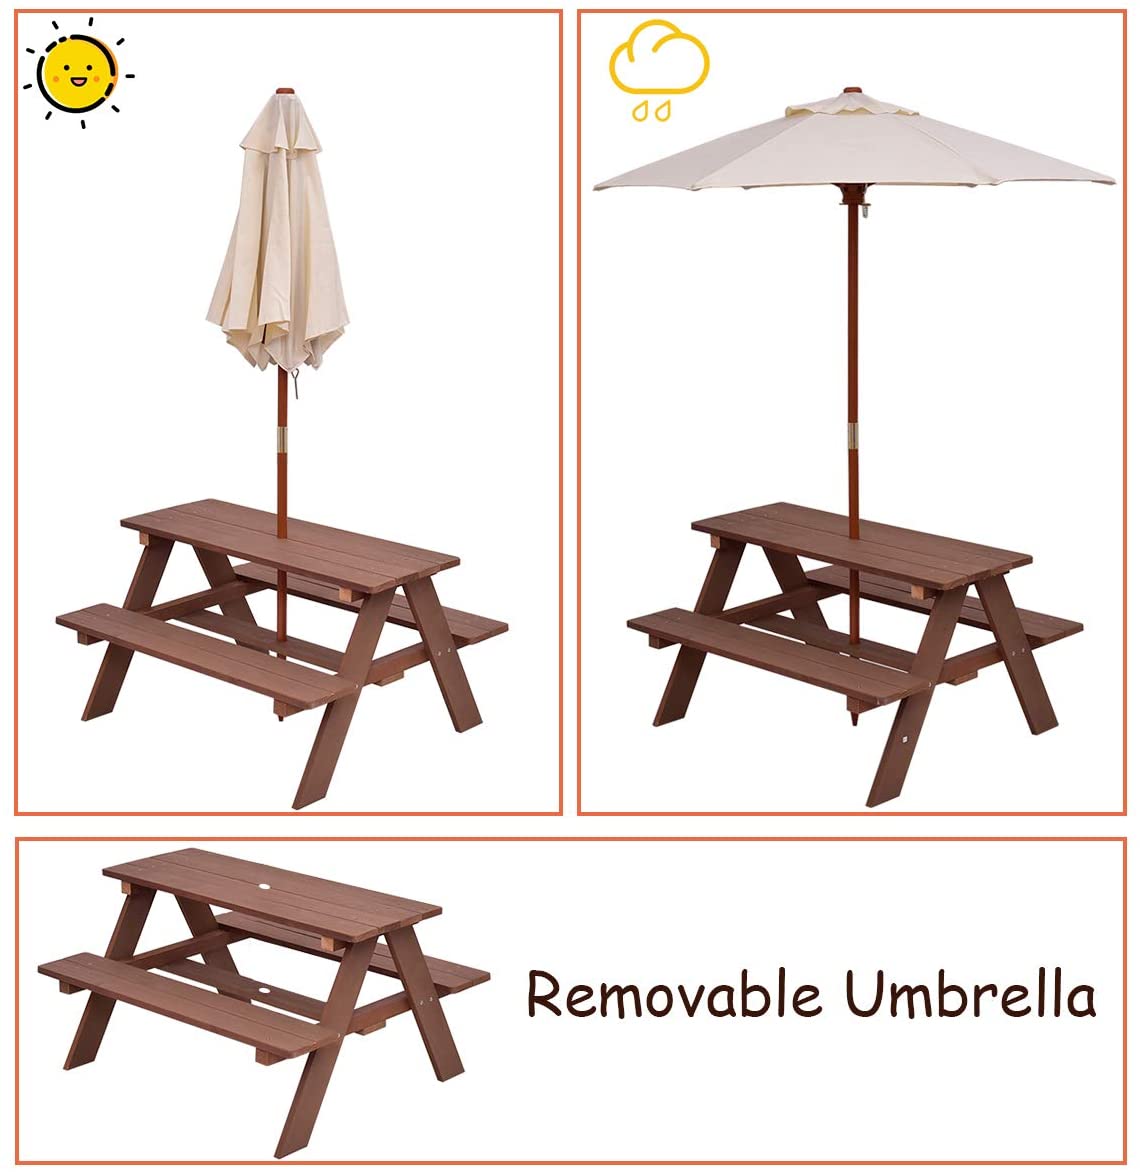 4-Seat Kids Outdoor Picnic Dining Table Bench Set with Removable Umbrella